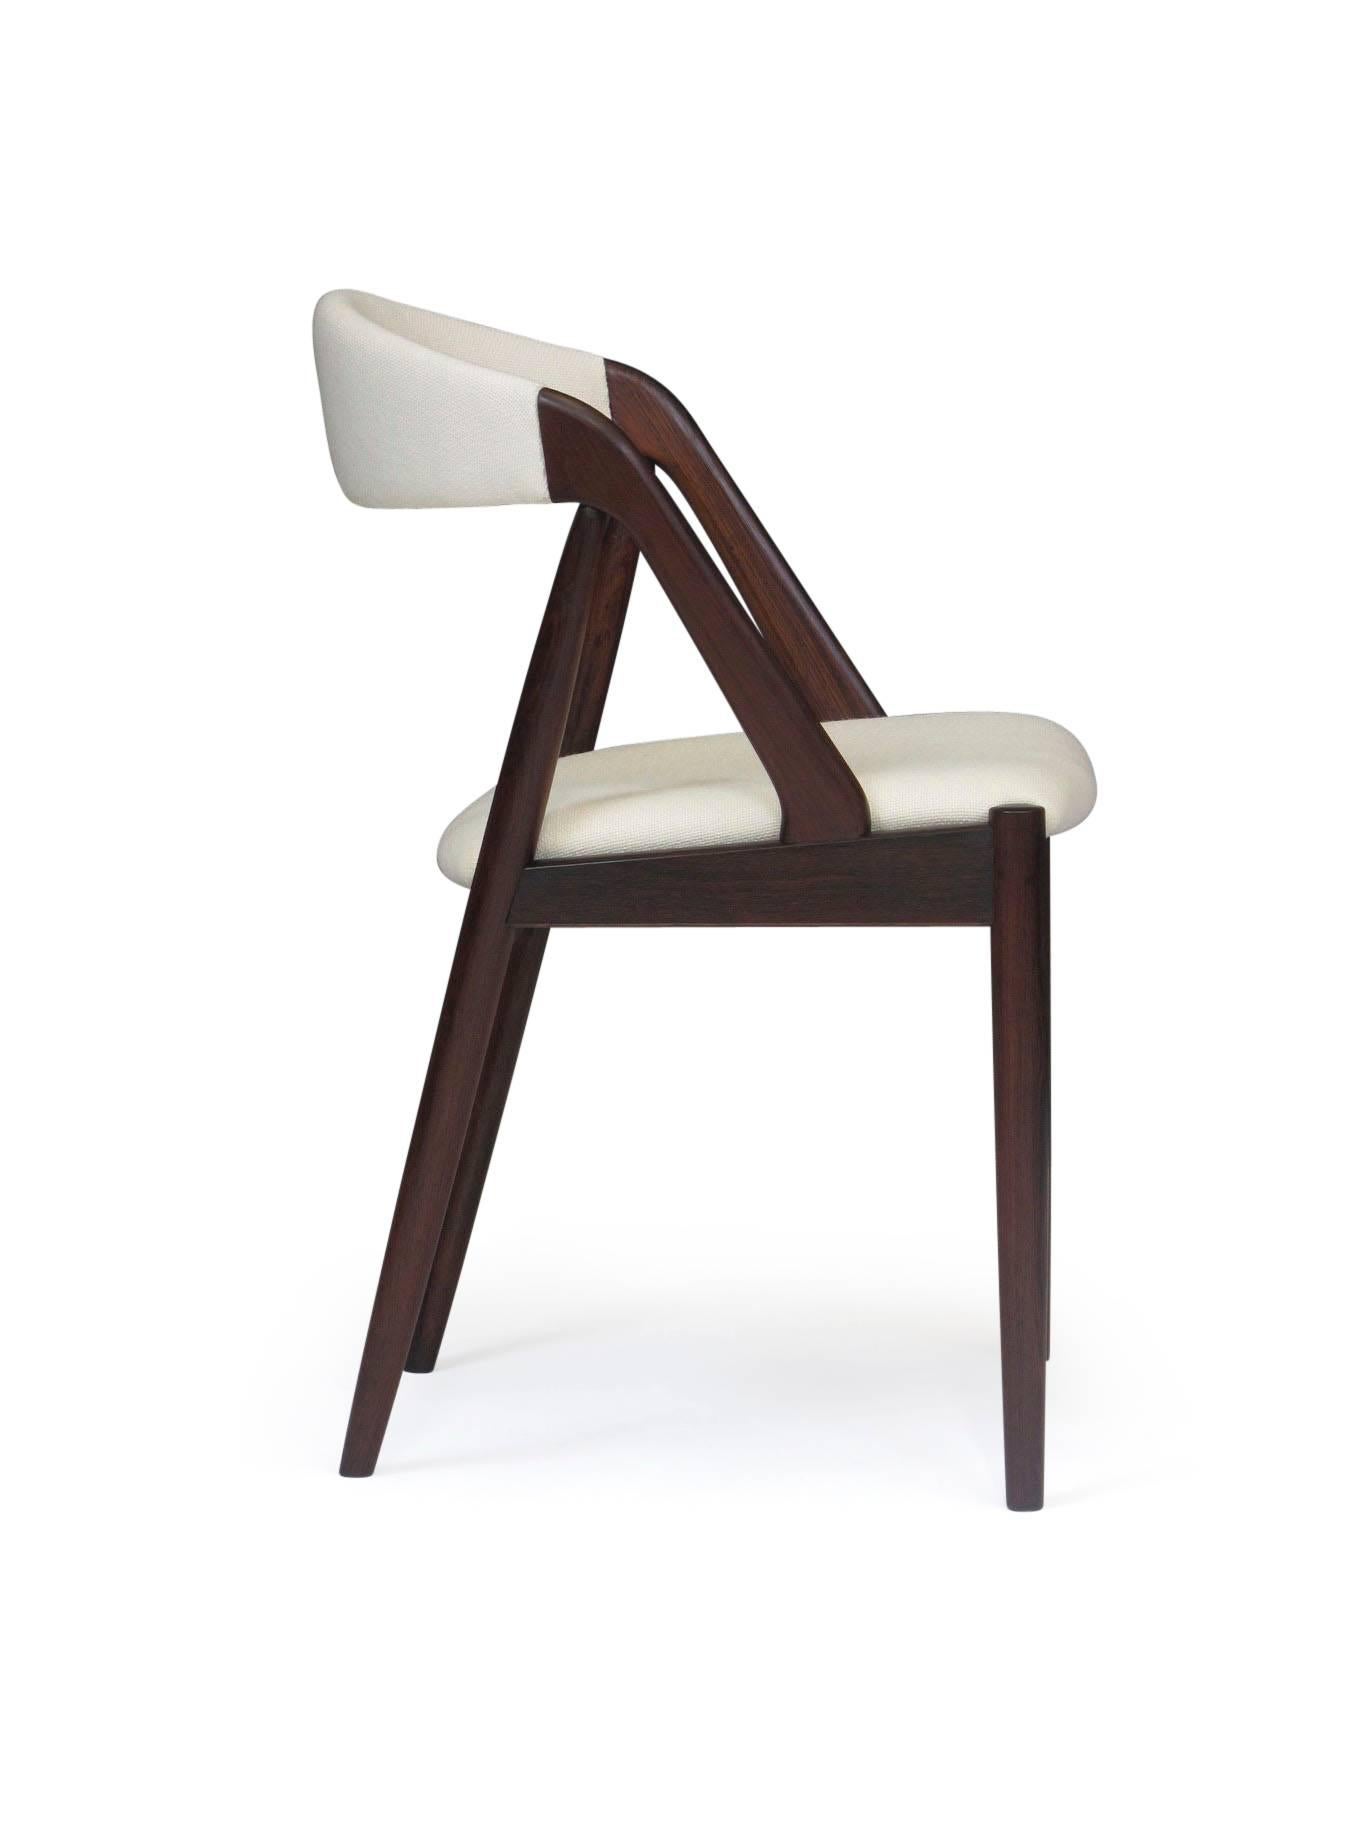 Six mid-century solid Brazilian Rosewood dining chairs designed by Kai Kristiansen. Crafted of solid Brazilian Rosewood frame with comfortable curved backs. Newly upholstered in a Scandinavian off-white wool textile. Professionally restored, the